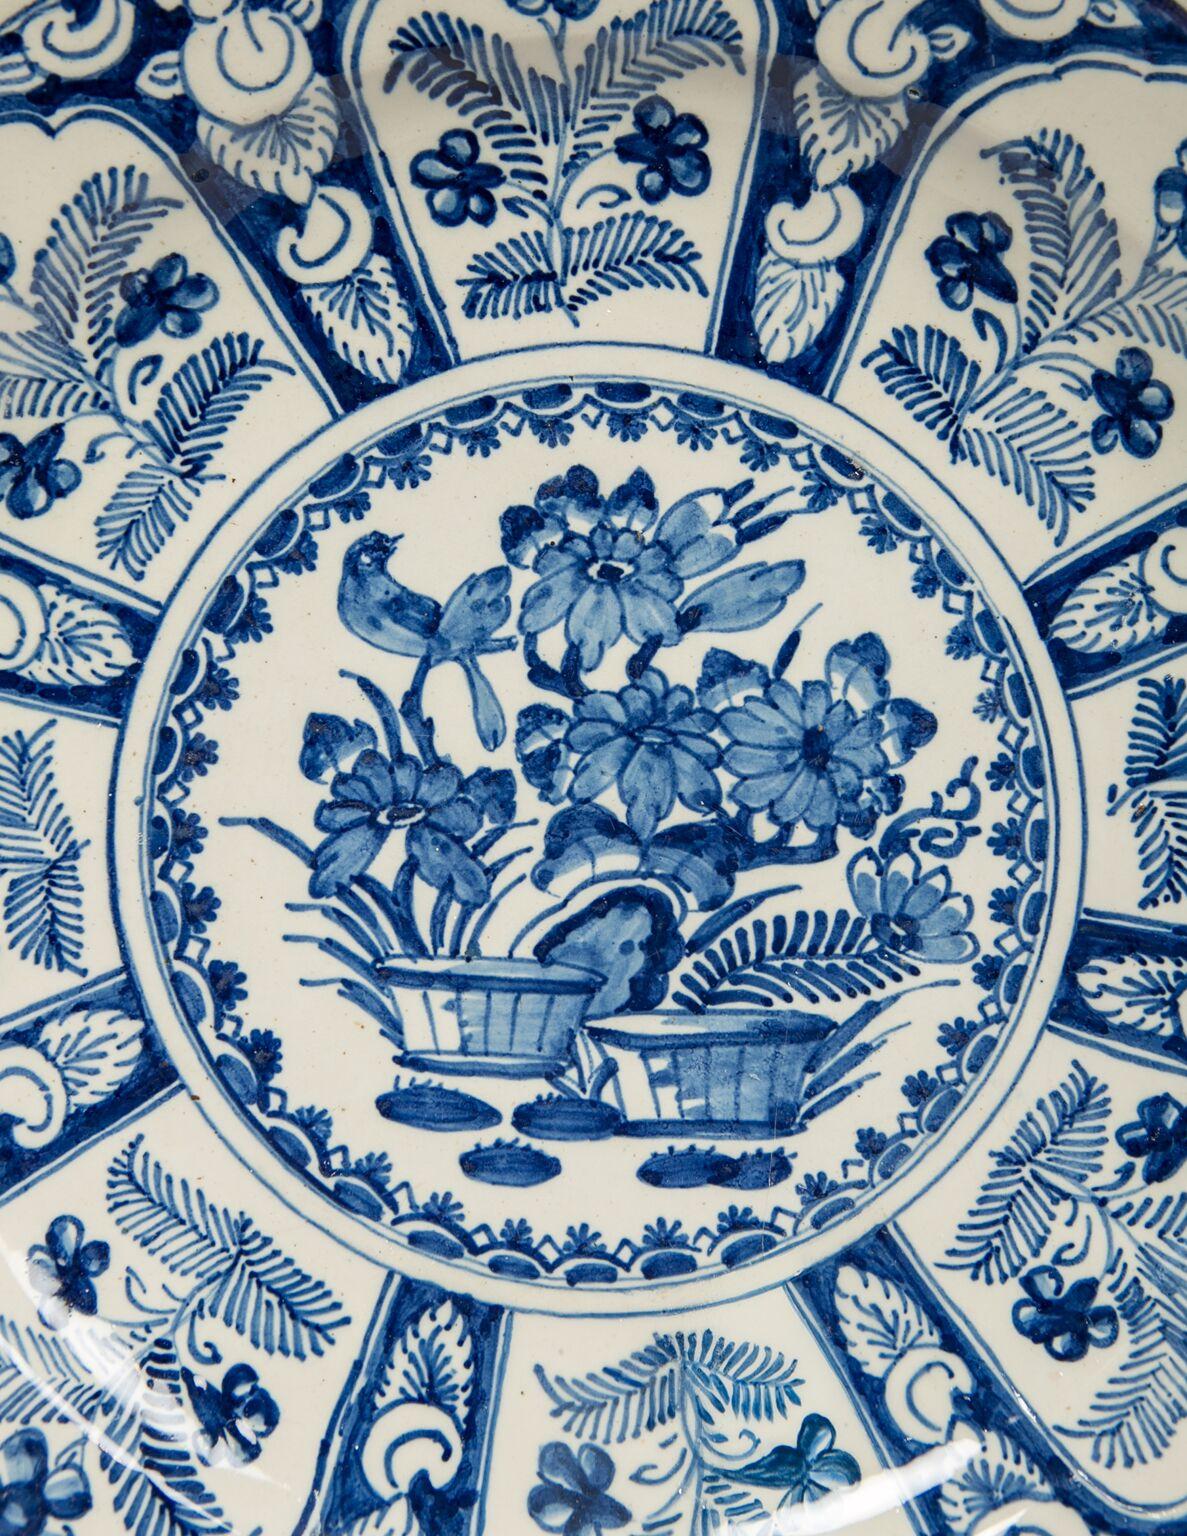 We are pleased to offer this hand painted, Dutch Delft blue and white charger. The charger is beautifully painted and attractively priced. The center of the charger is decorated with a songbird in a flowering garden. Around the central scene are